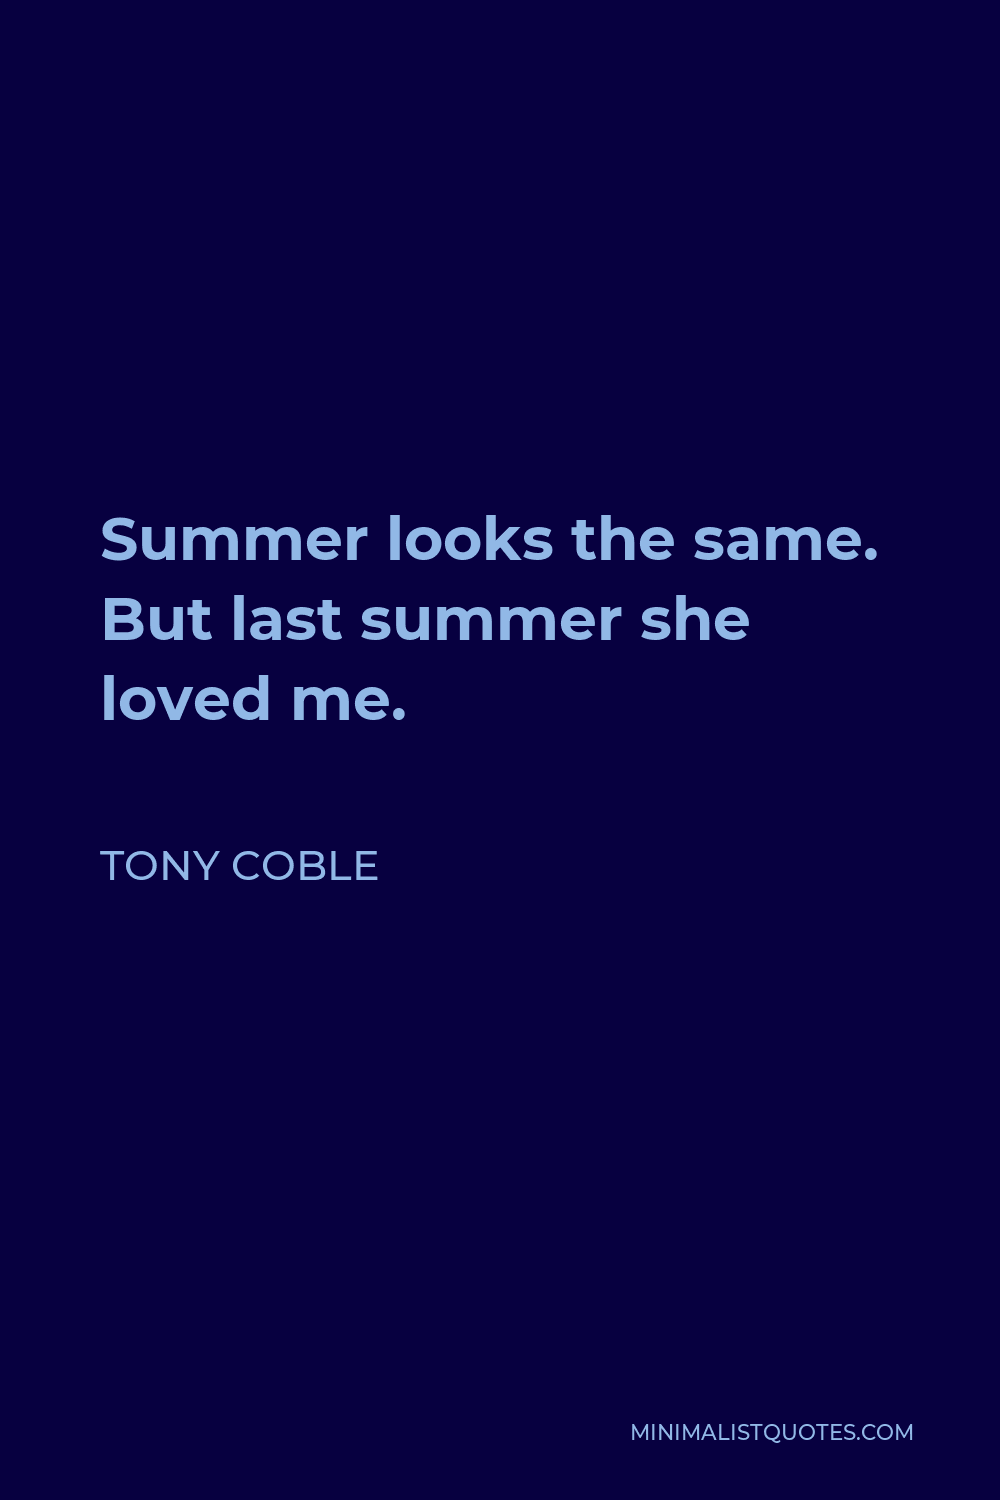 Tony Coble Quote - Summer looks the same. But last summer she loved me.